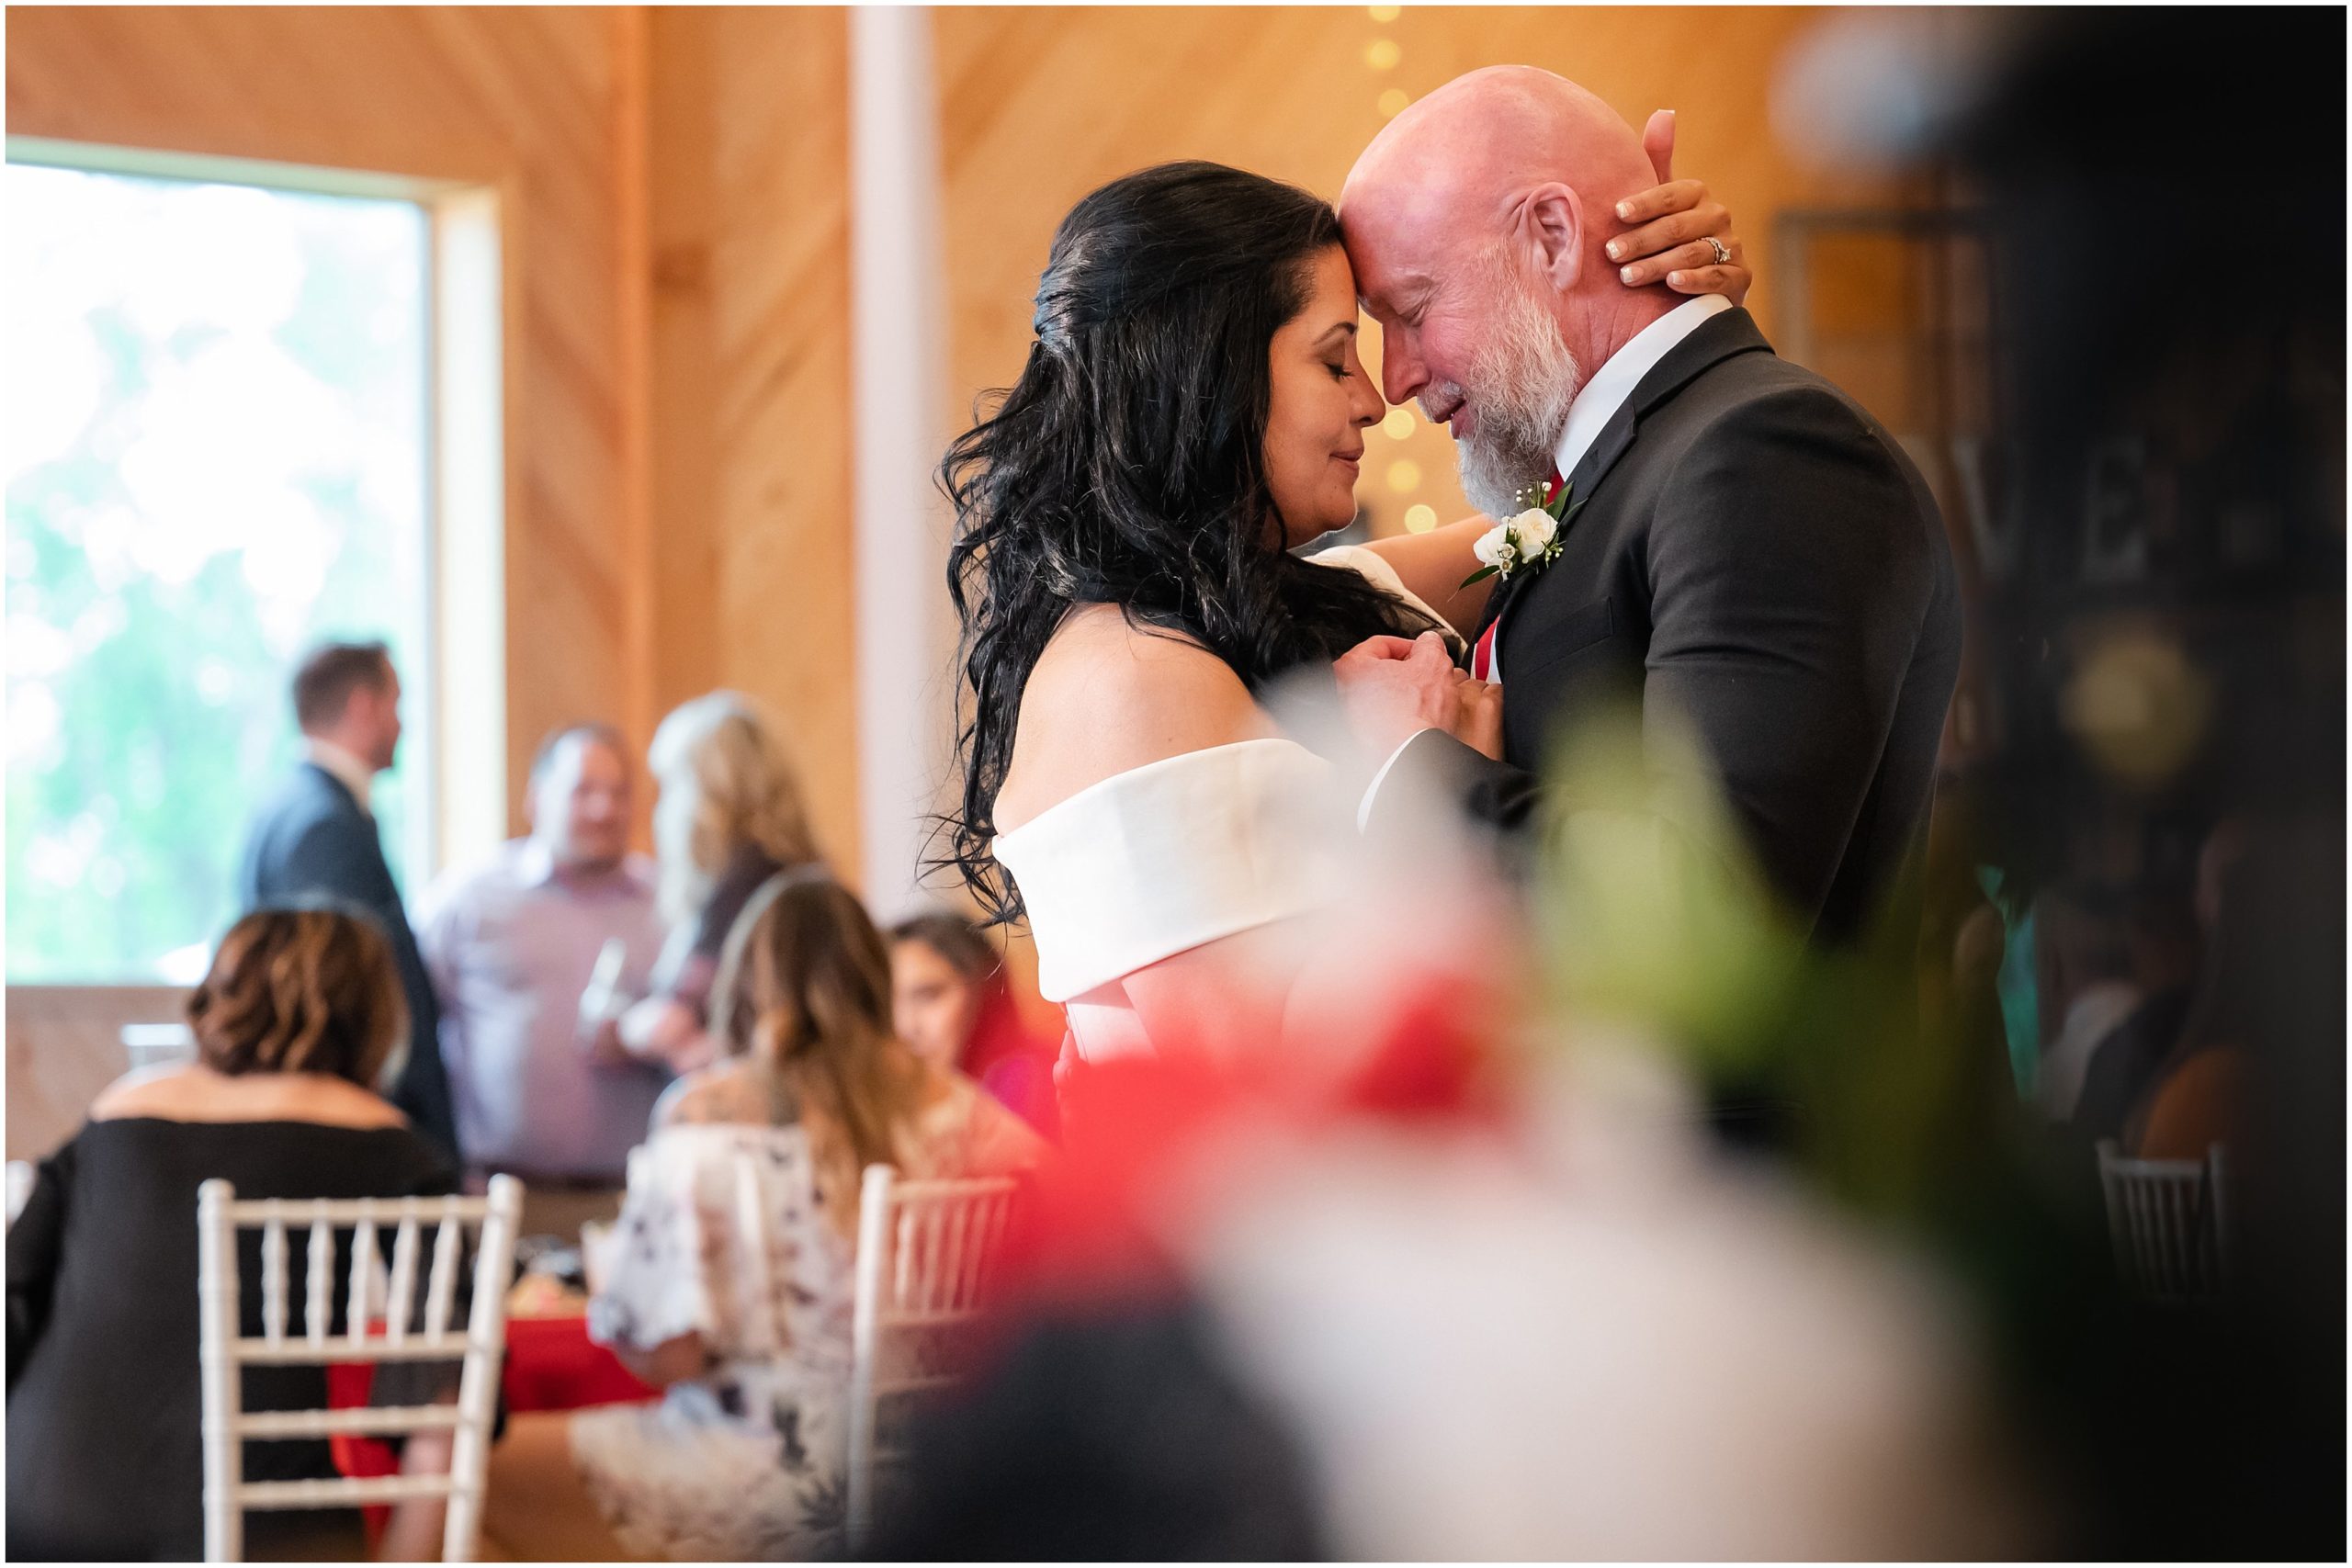 Bride and groom grand entrance and first dance in rustic barn | Red and Black Oak Hills Utah Spring Wedding | Jessie and Dallin Photography